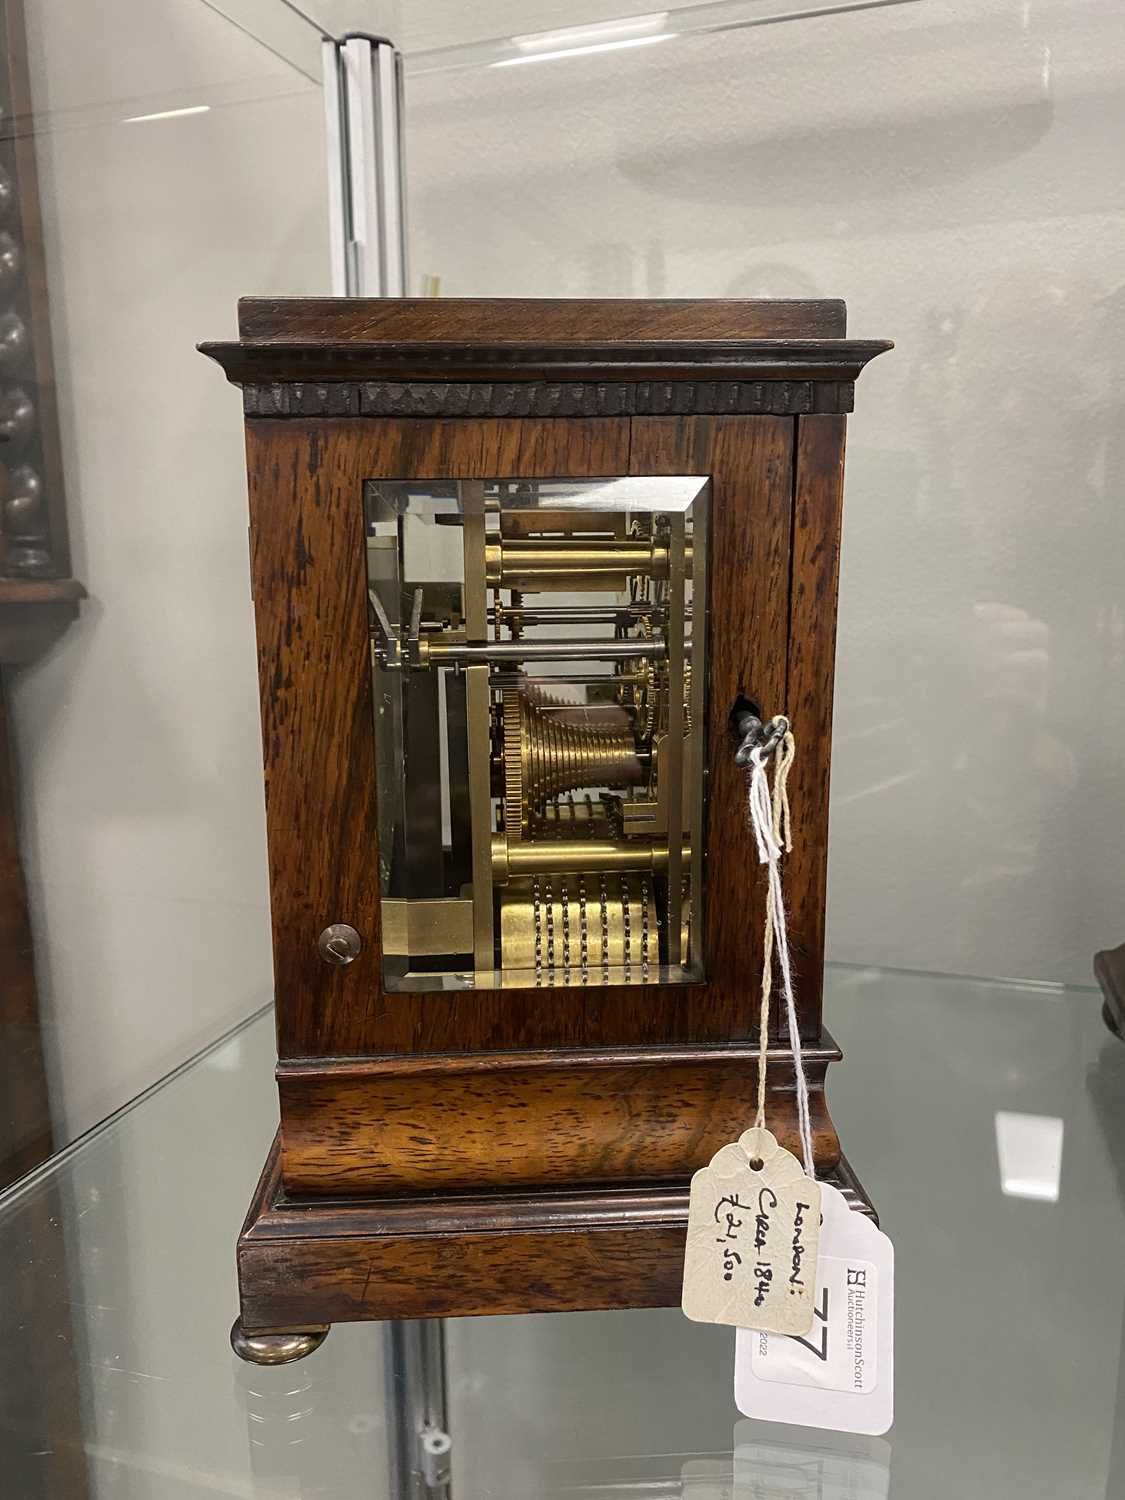 FRODSHAM, GRACECHURCH STREET, LONDON. A FINE AND SMALL ROSEWOOD DOUBLE FUSEE LIBRARY CLOCK WITH LEVE - Image 9 of 13